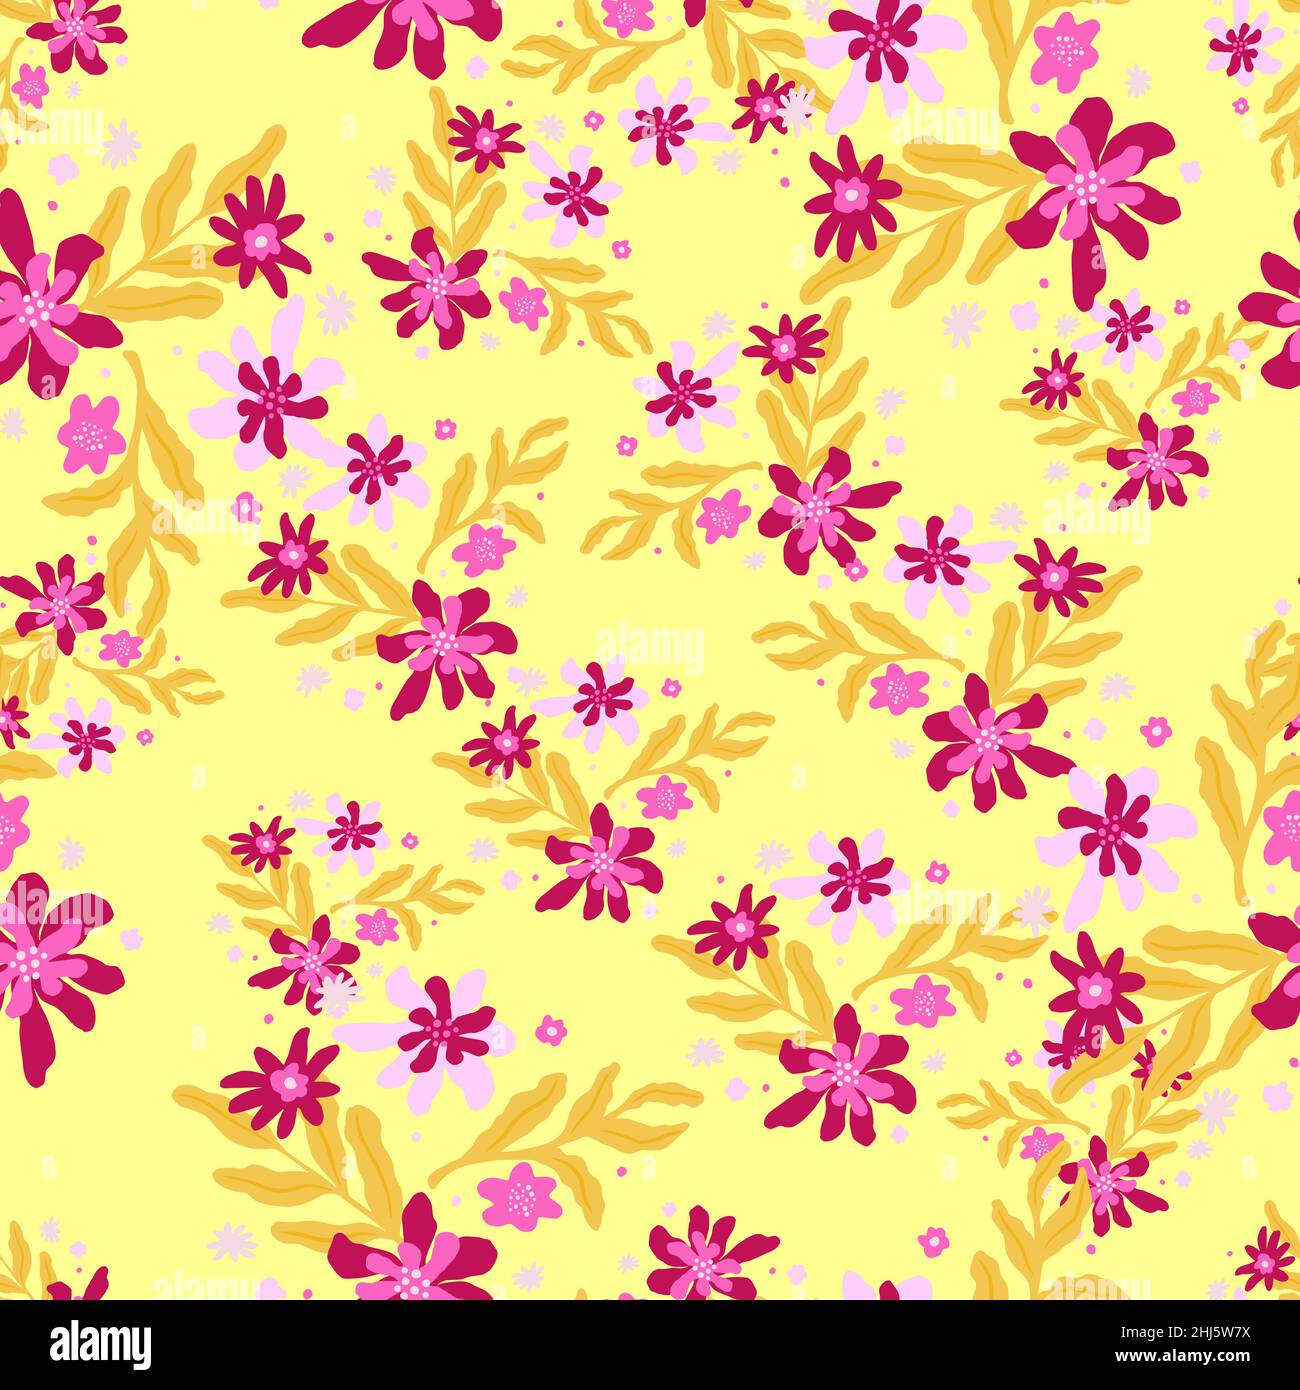 Vintage seamless pattern with random pink flower silhouettes and foliage shapes. Yellow background. Flat vector print for textile, fabric, giftwrap, w Stock Vector